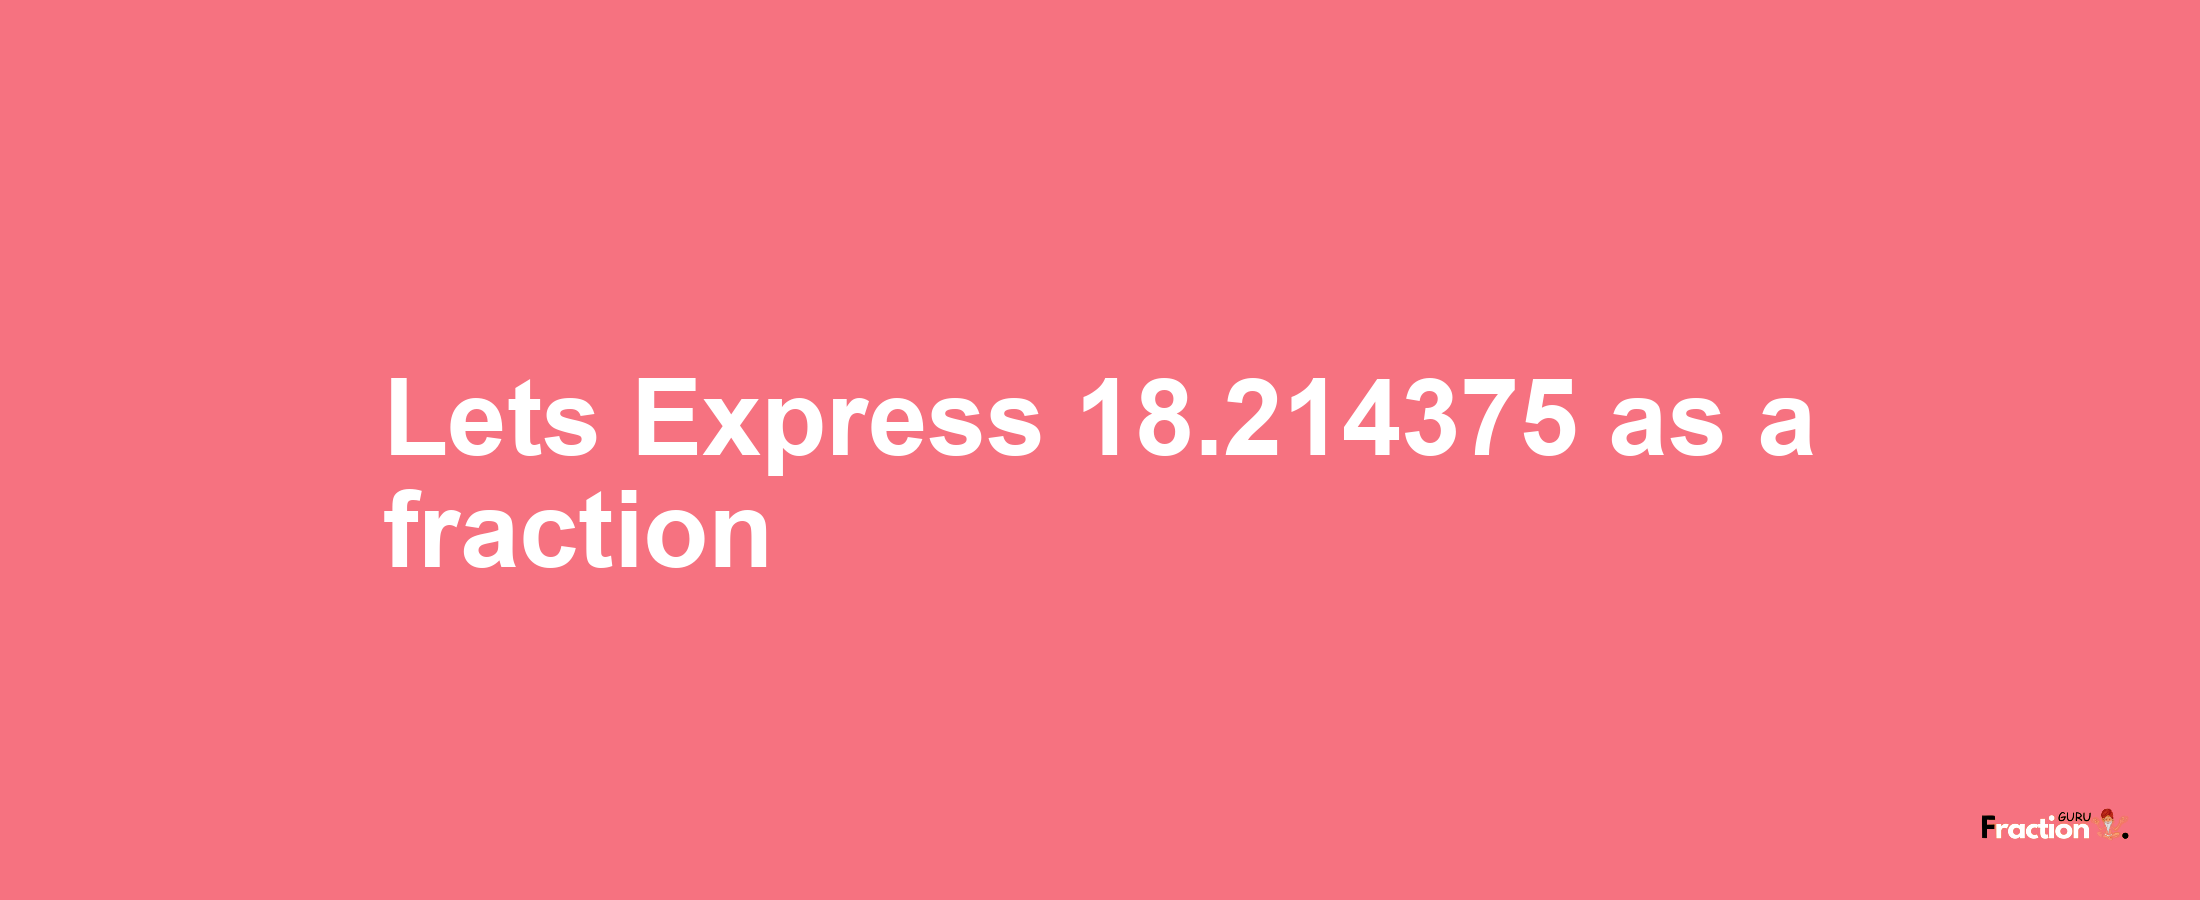 Lets Express 18.214375 as afraction